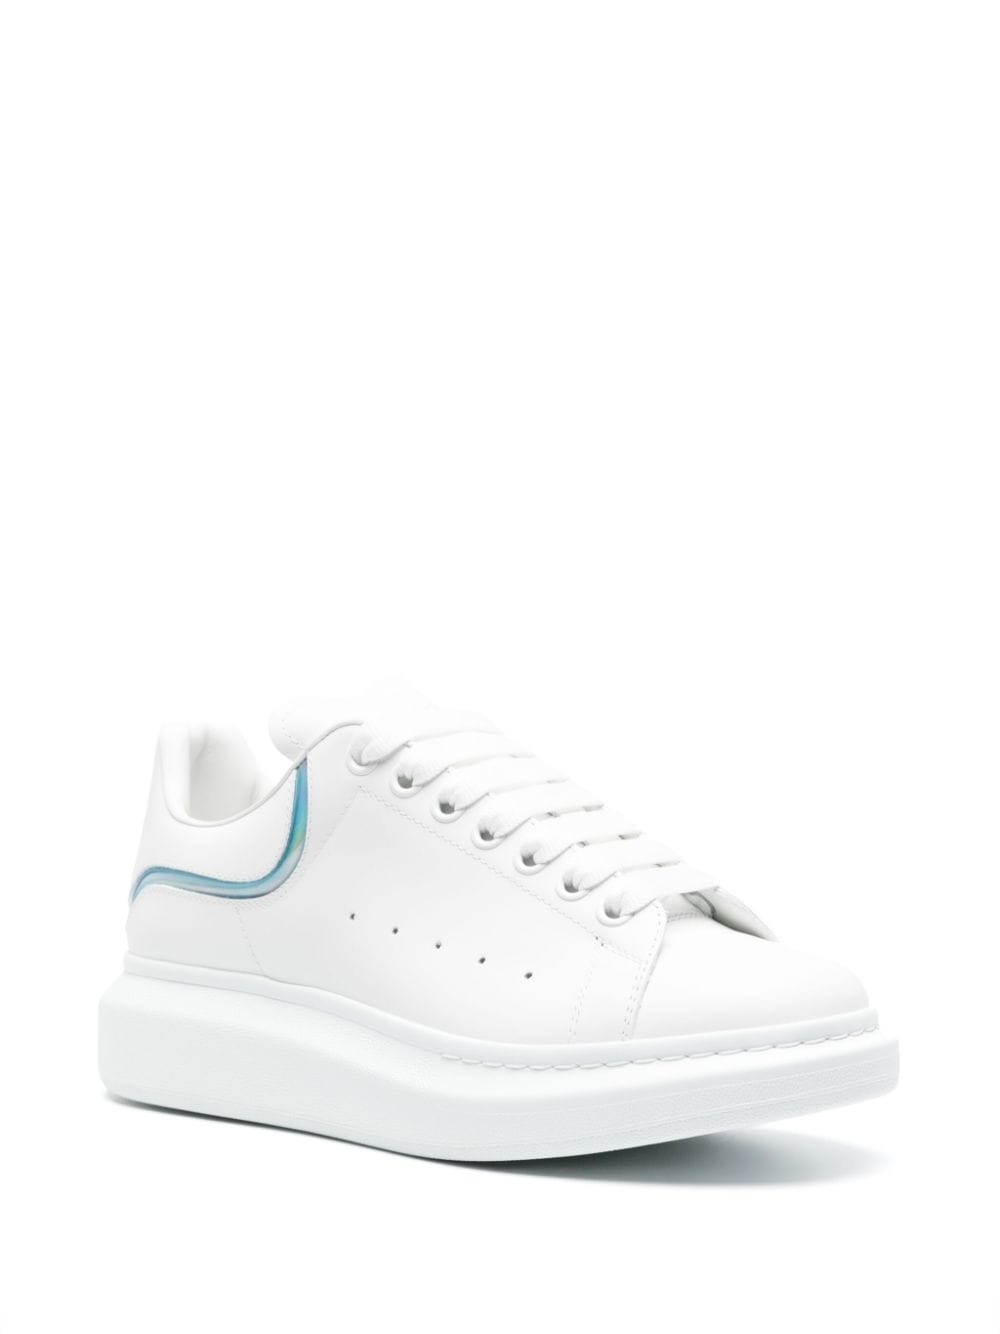 iridescent-stripe leather sneakers - 2